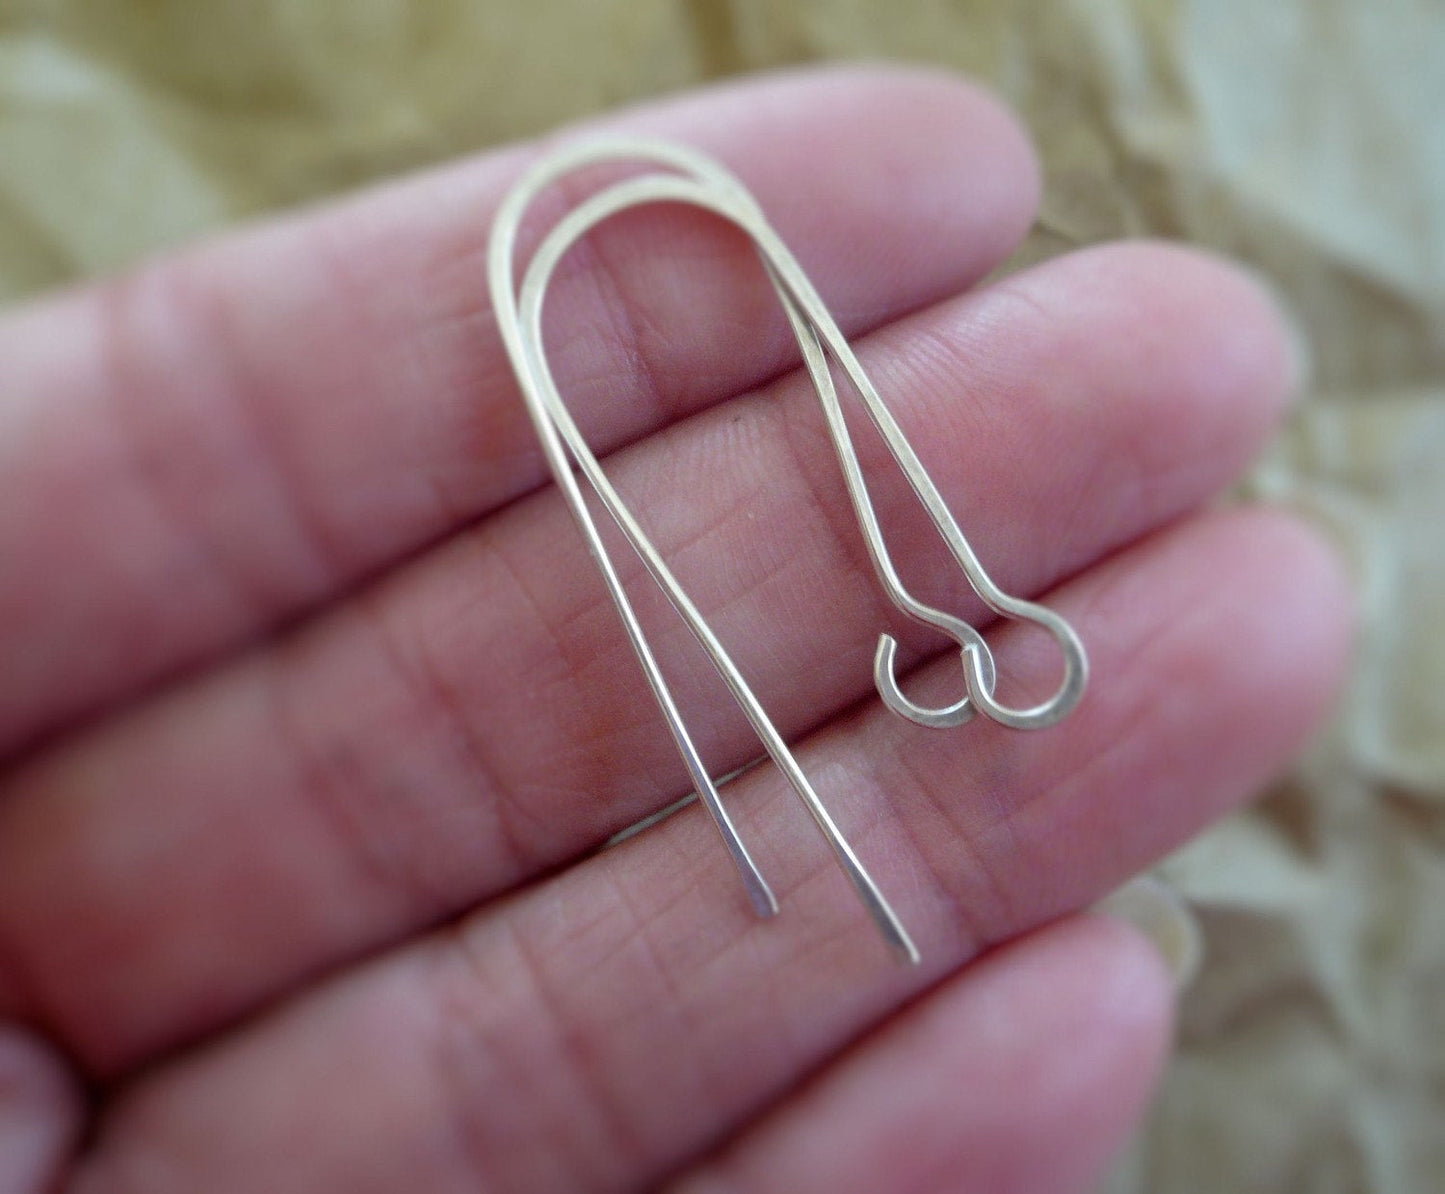 Minimalist Sterling Silver Earwires - Handmade. Handforged. Oxidized and Polished